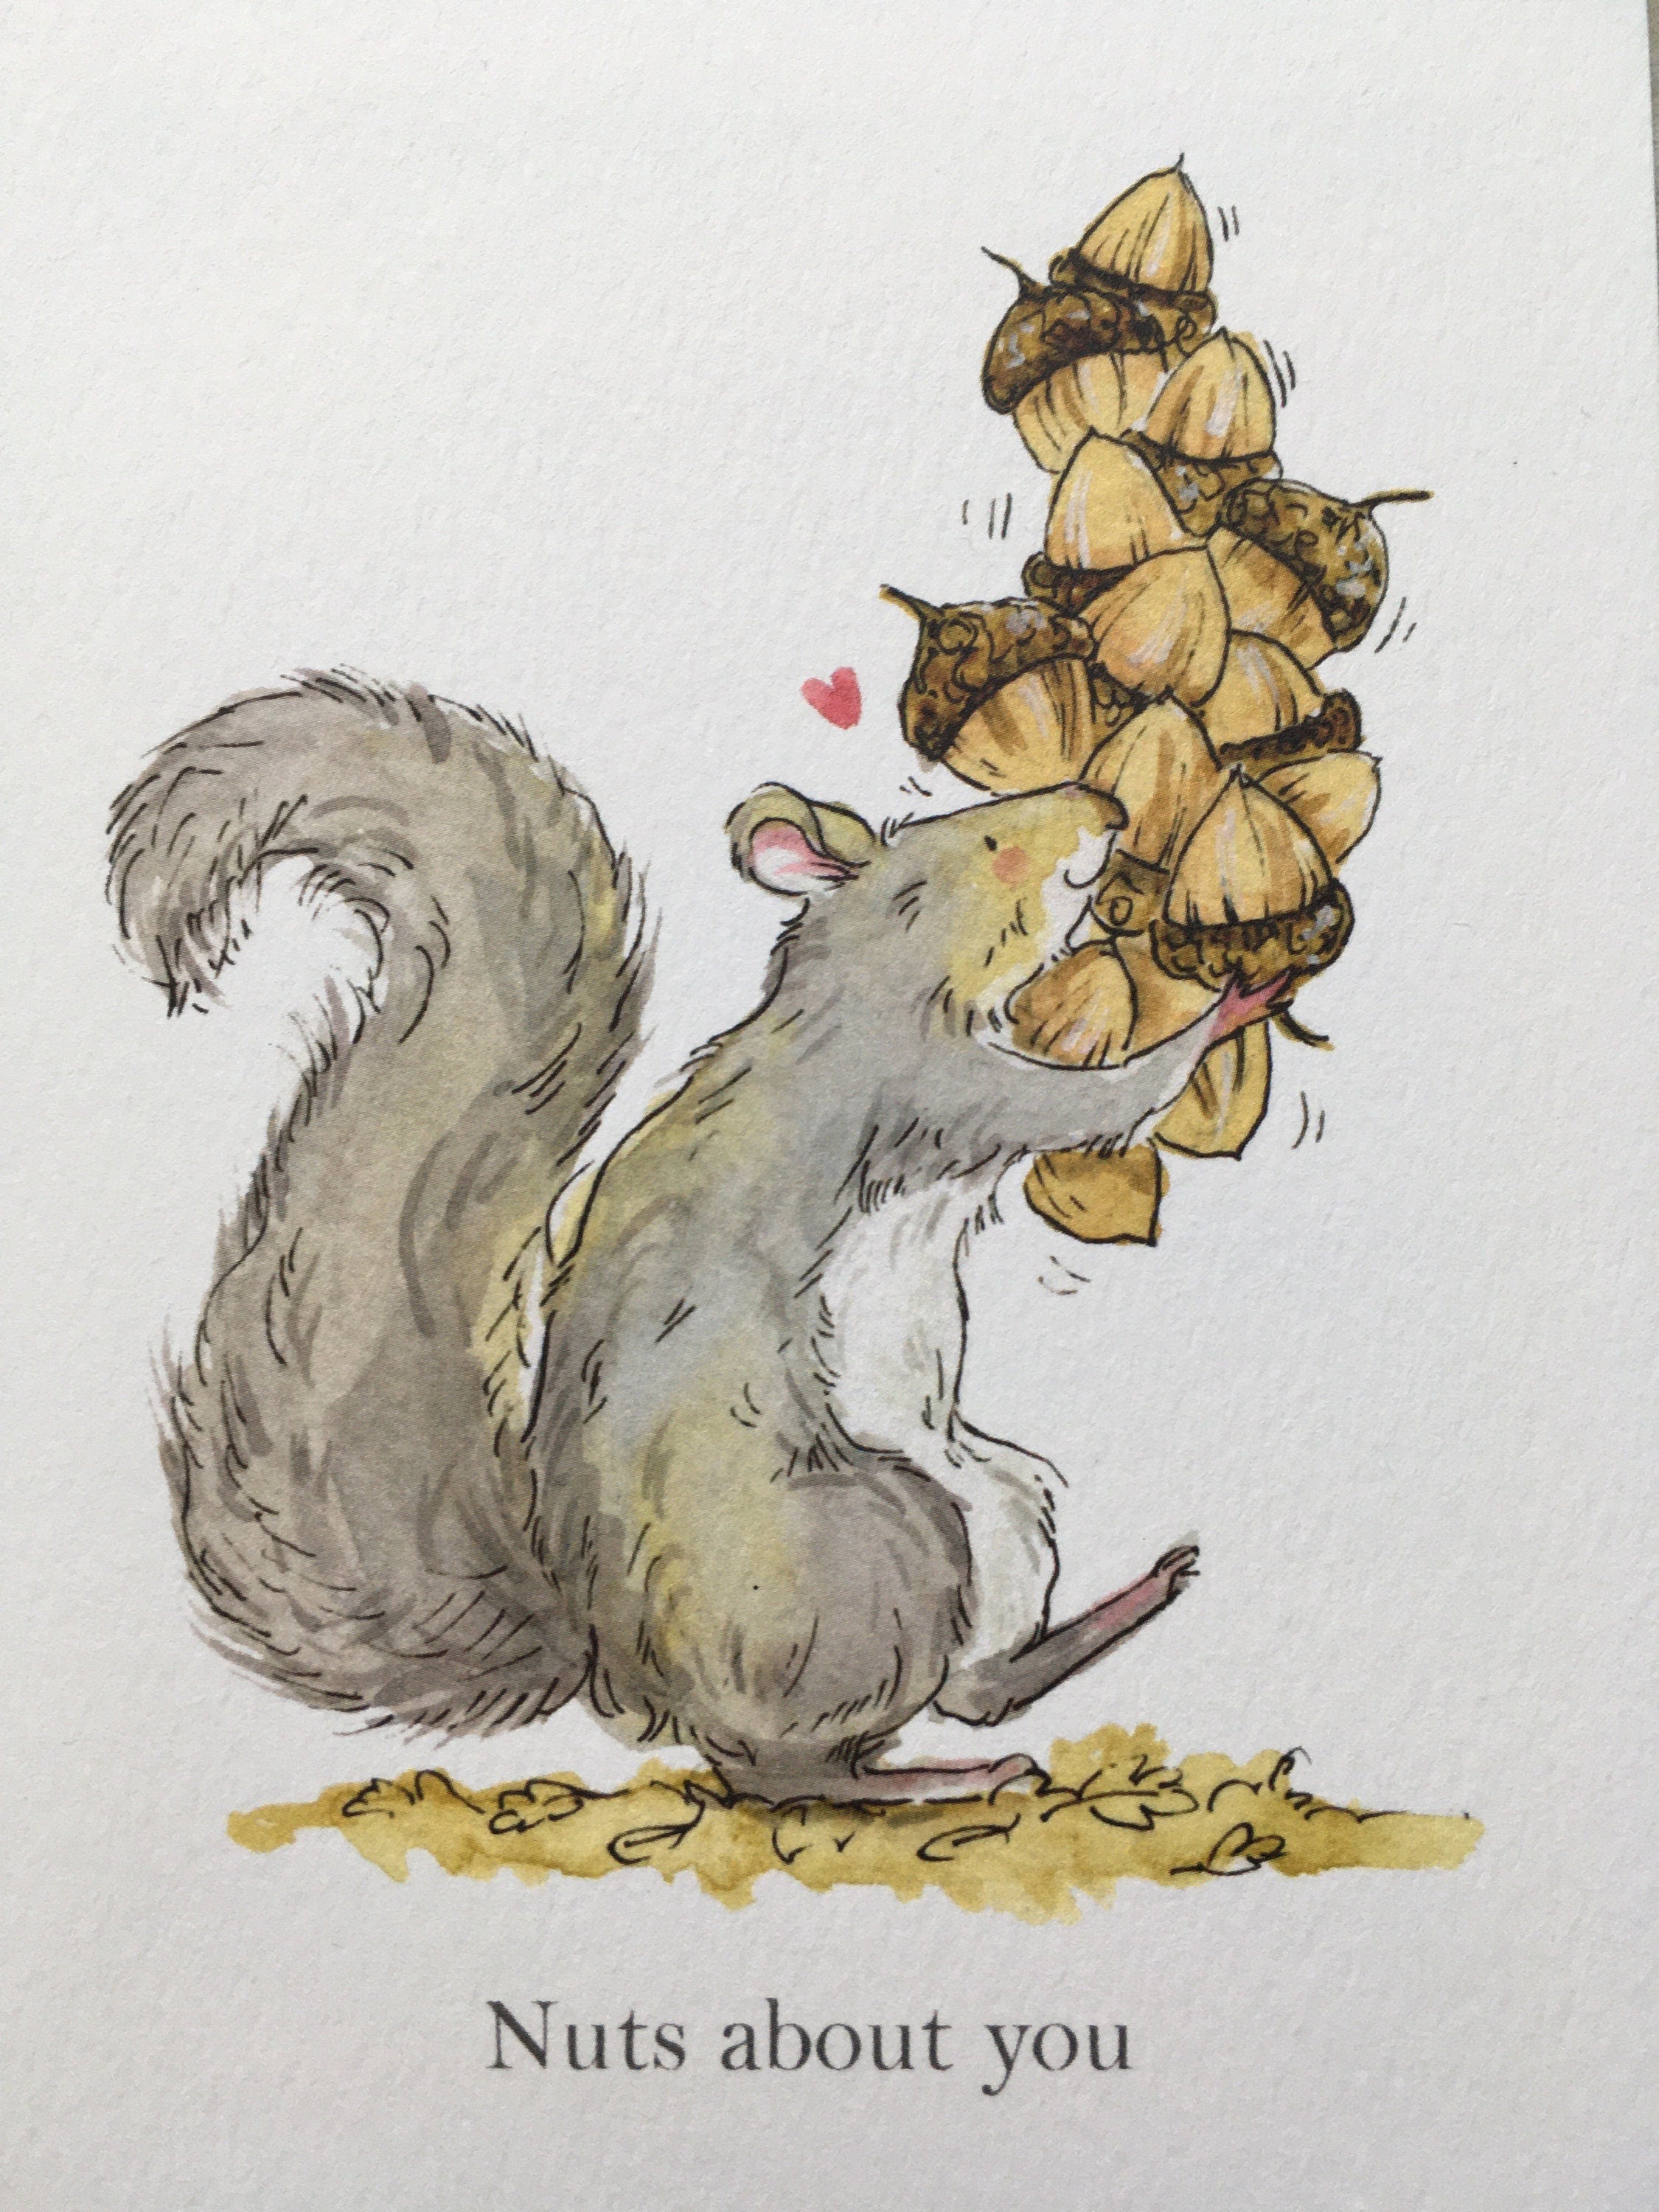 Nuts about you Valentine's Card